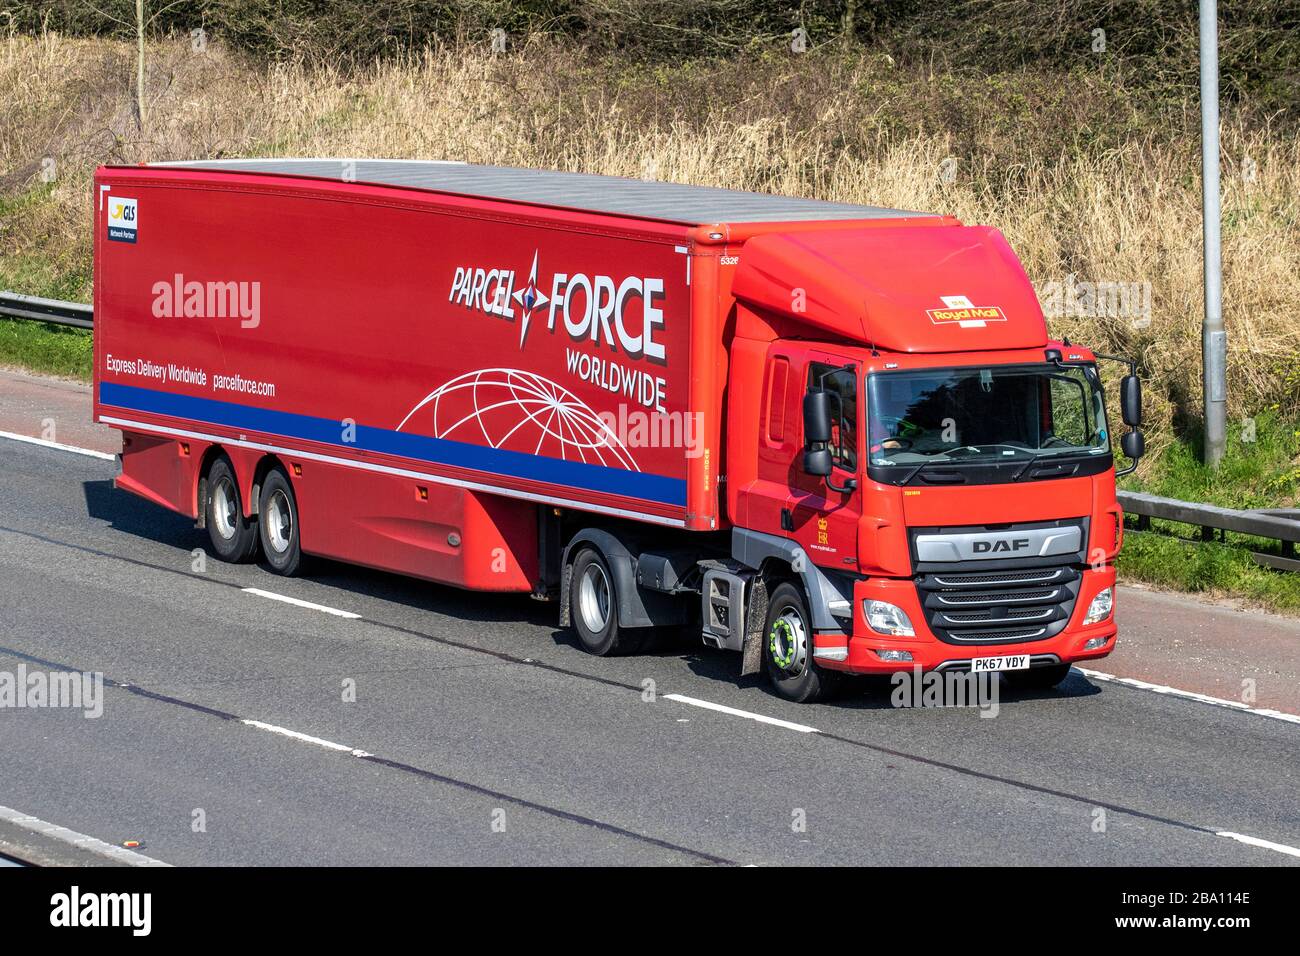 Parcel Force Worldwide Haulage delivery trucks, Post Office lorry, transportation, truck, cargo carrier, DAF HGV vehicle, European commercial transport industry, M6 at Manchester, UK Stock Photo